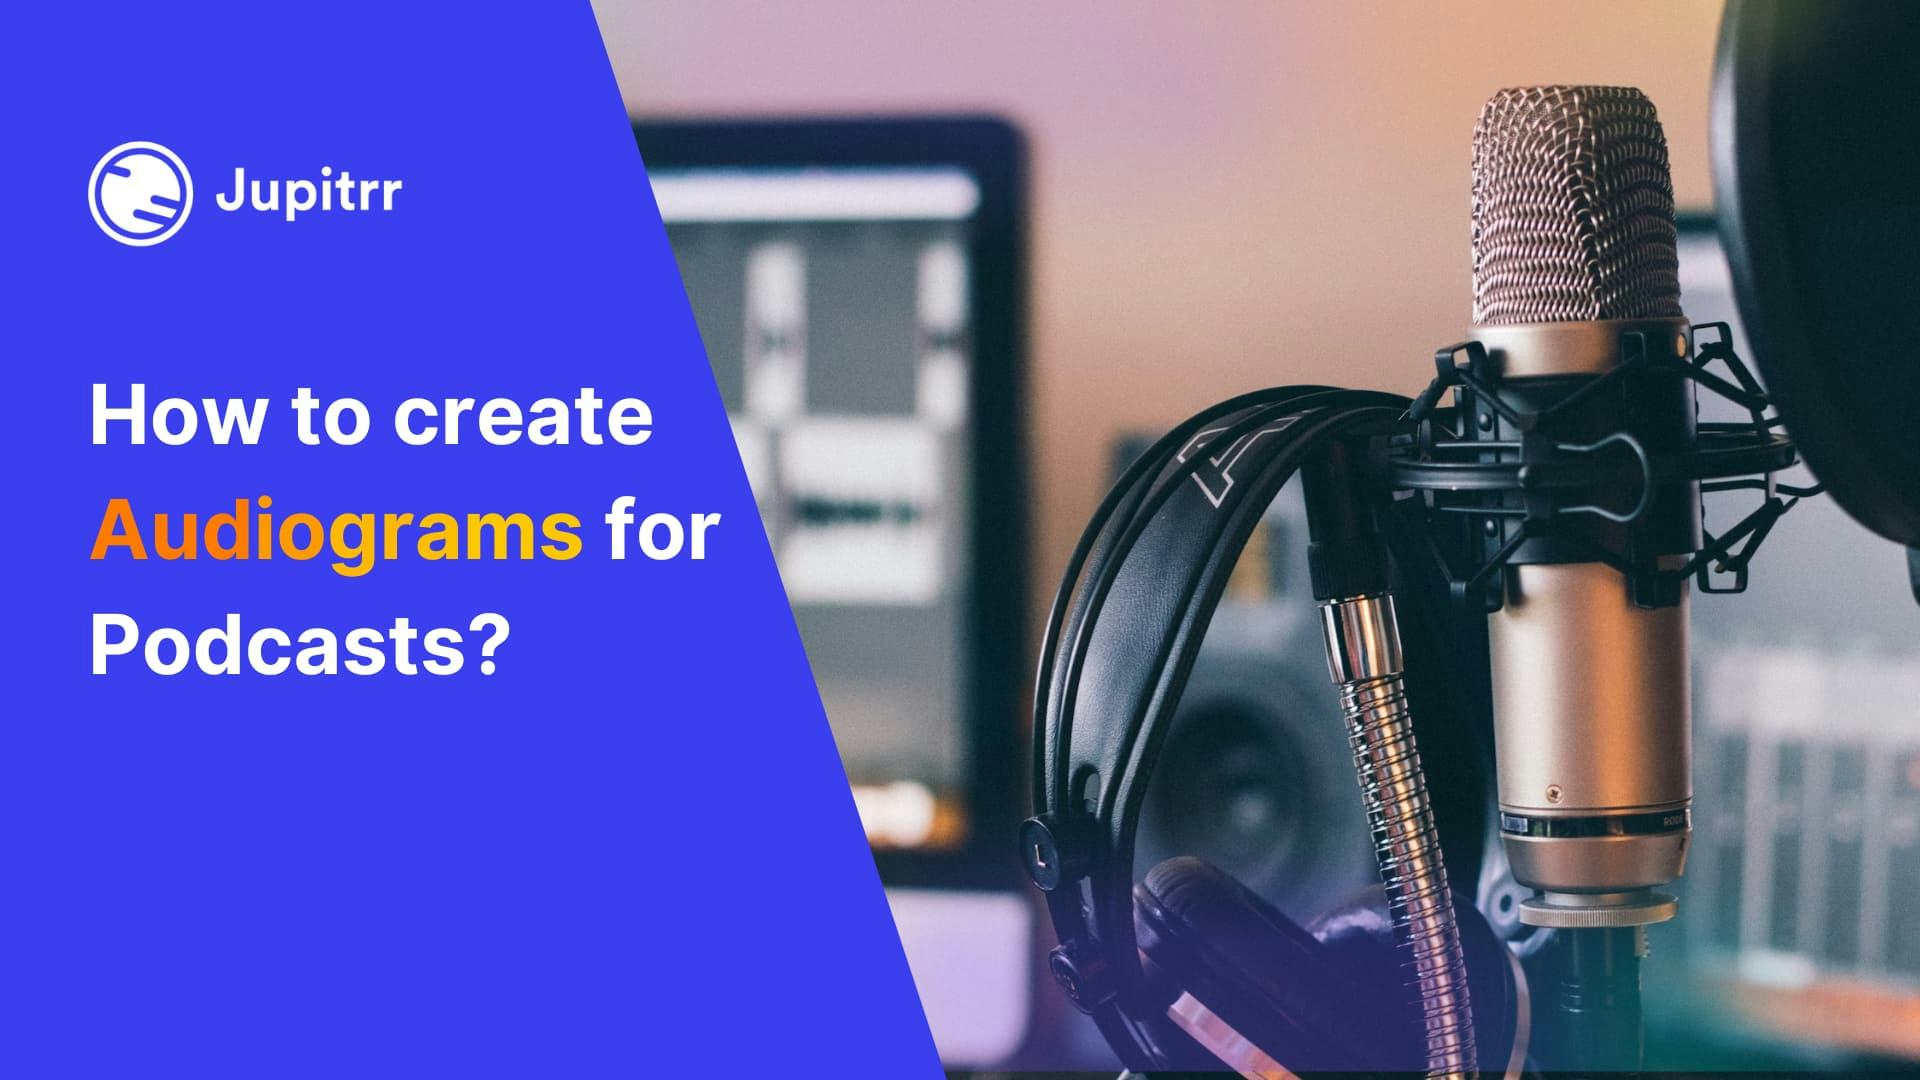 How to use an Audiogram Generator for Podcasts?